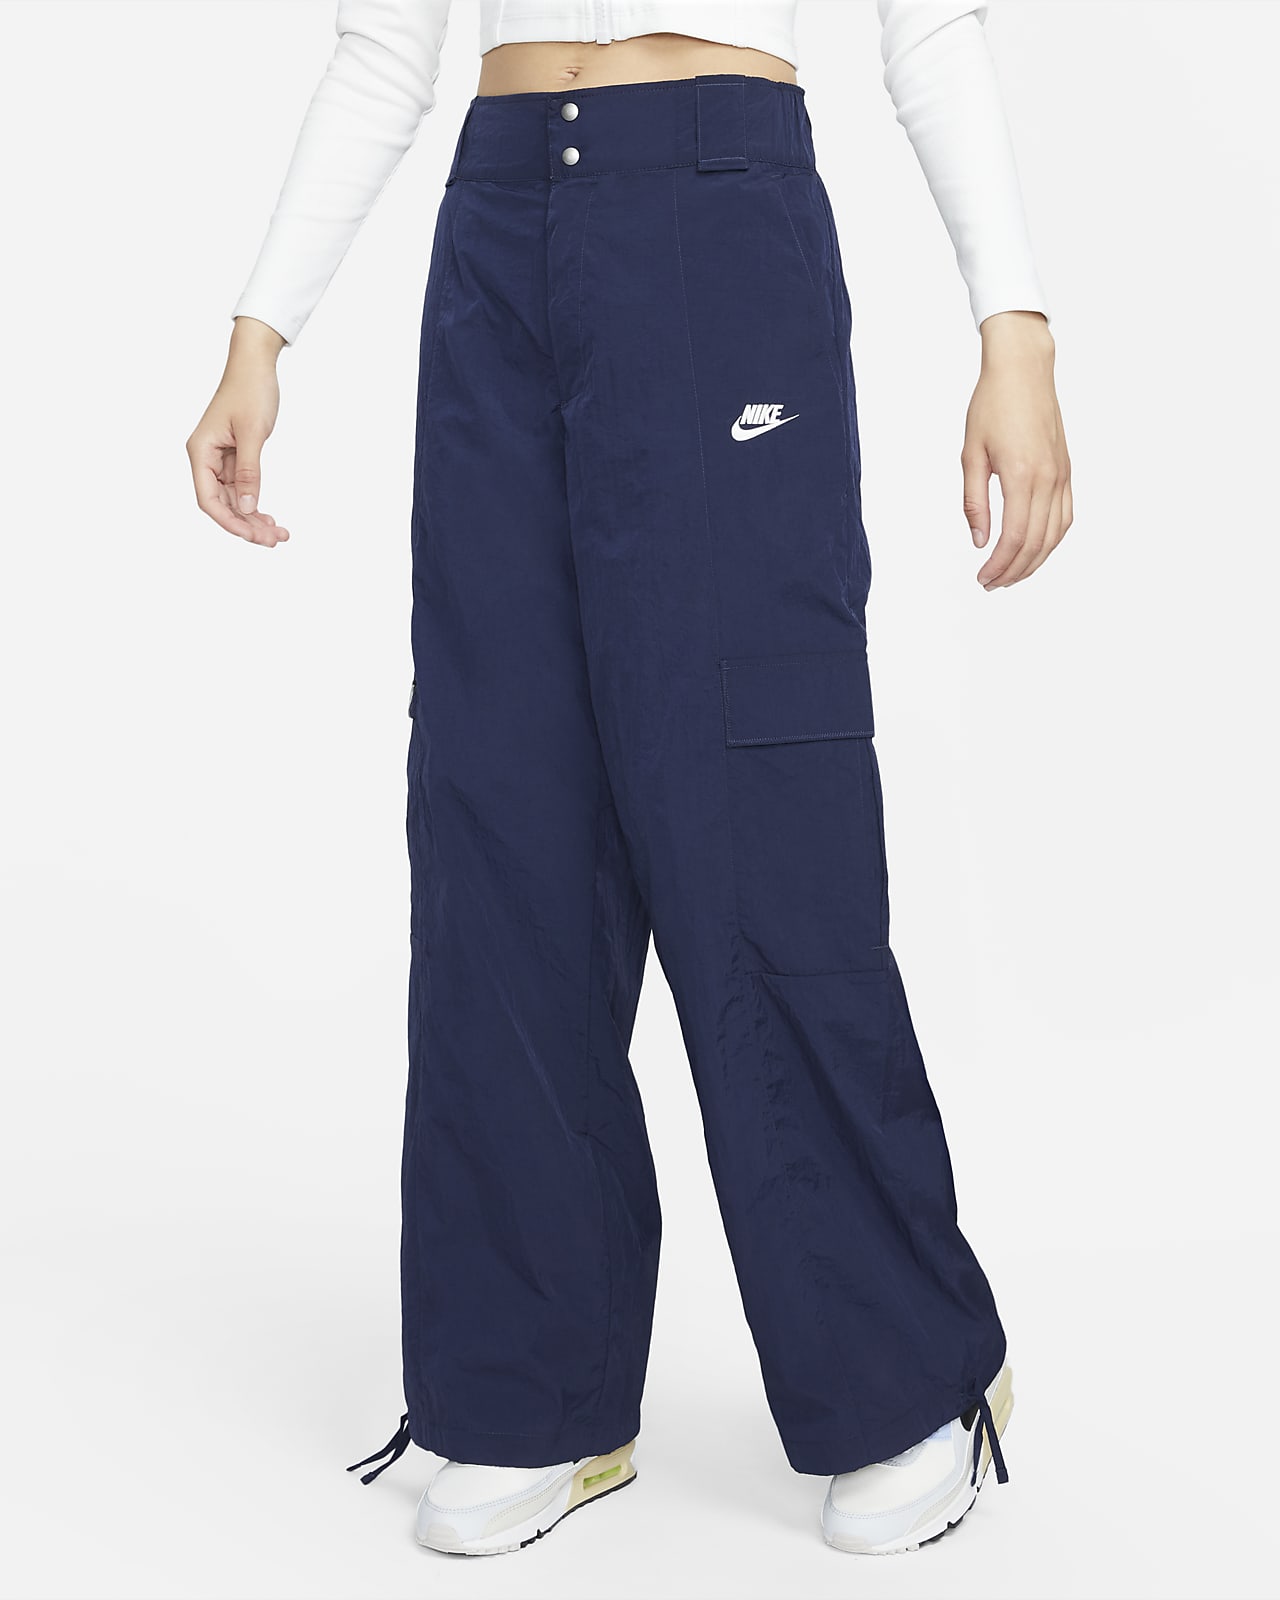 In typical Sarah fashion I would find the perfect joggers only for